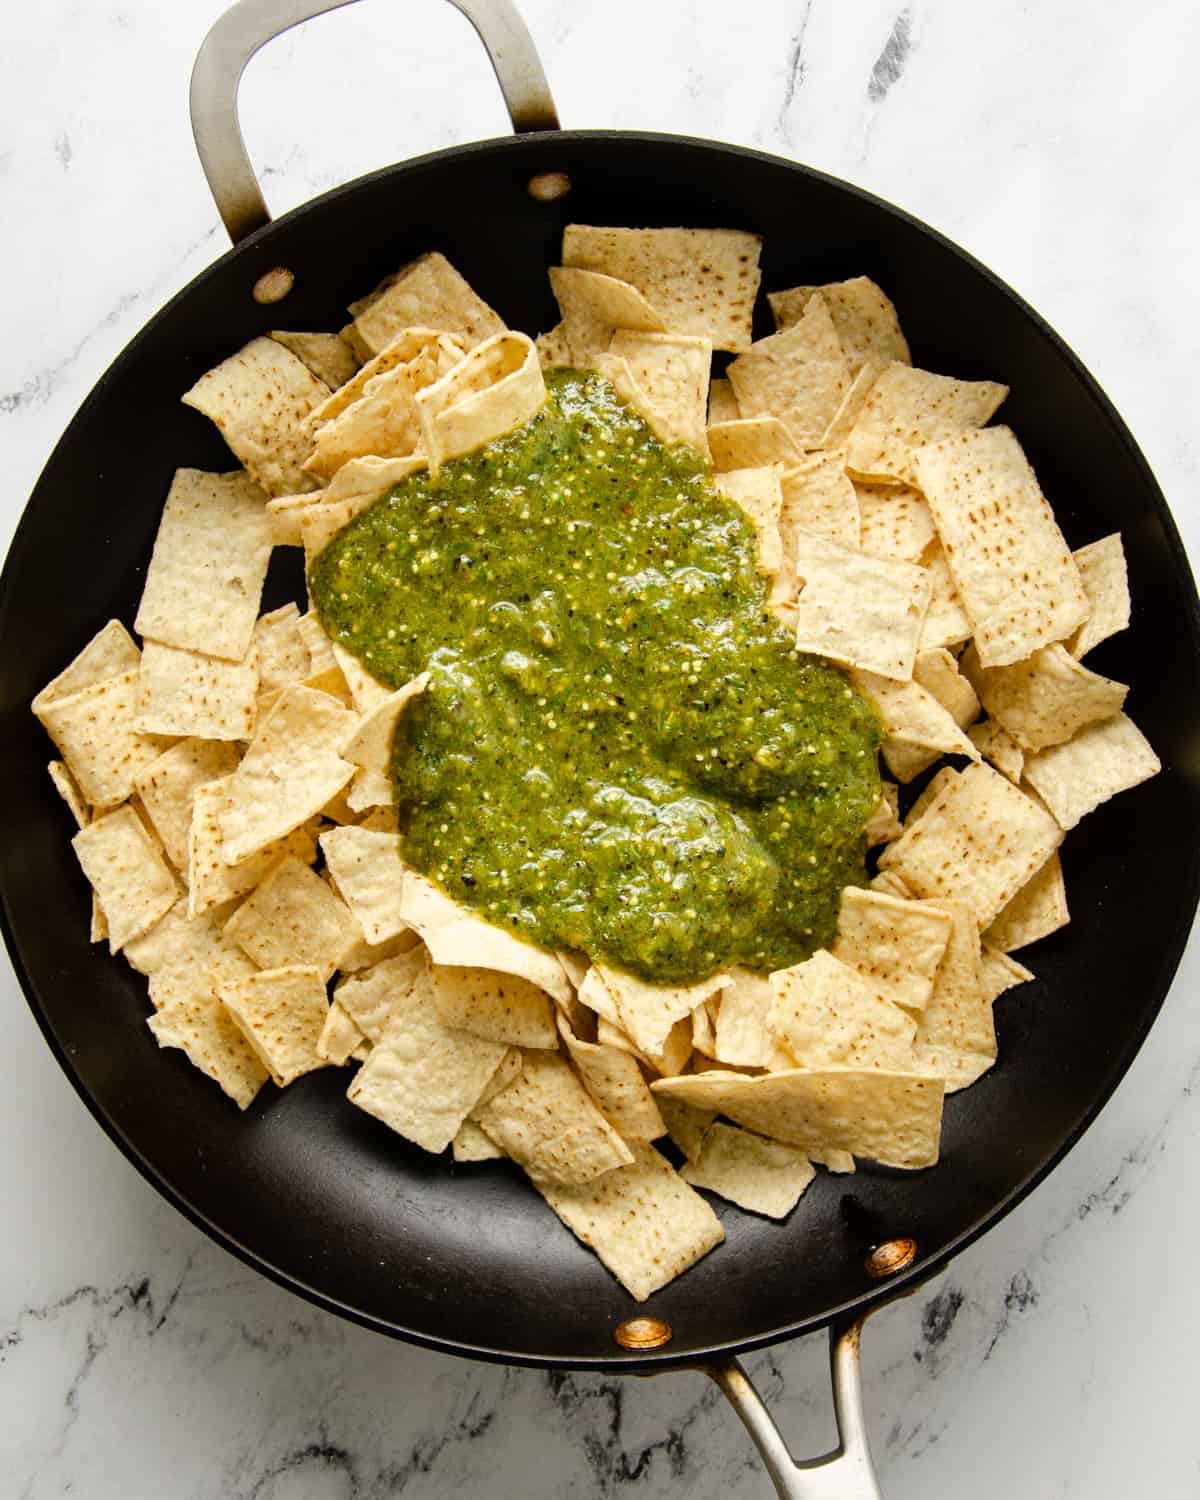 A skillet with tortilla chips and salsa verde.